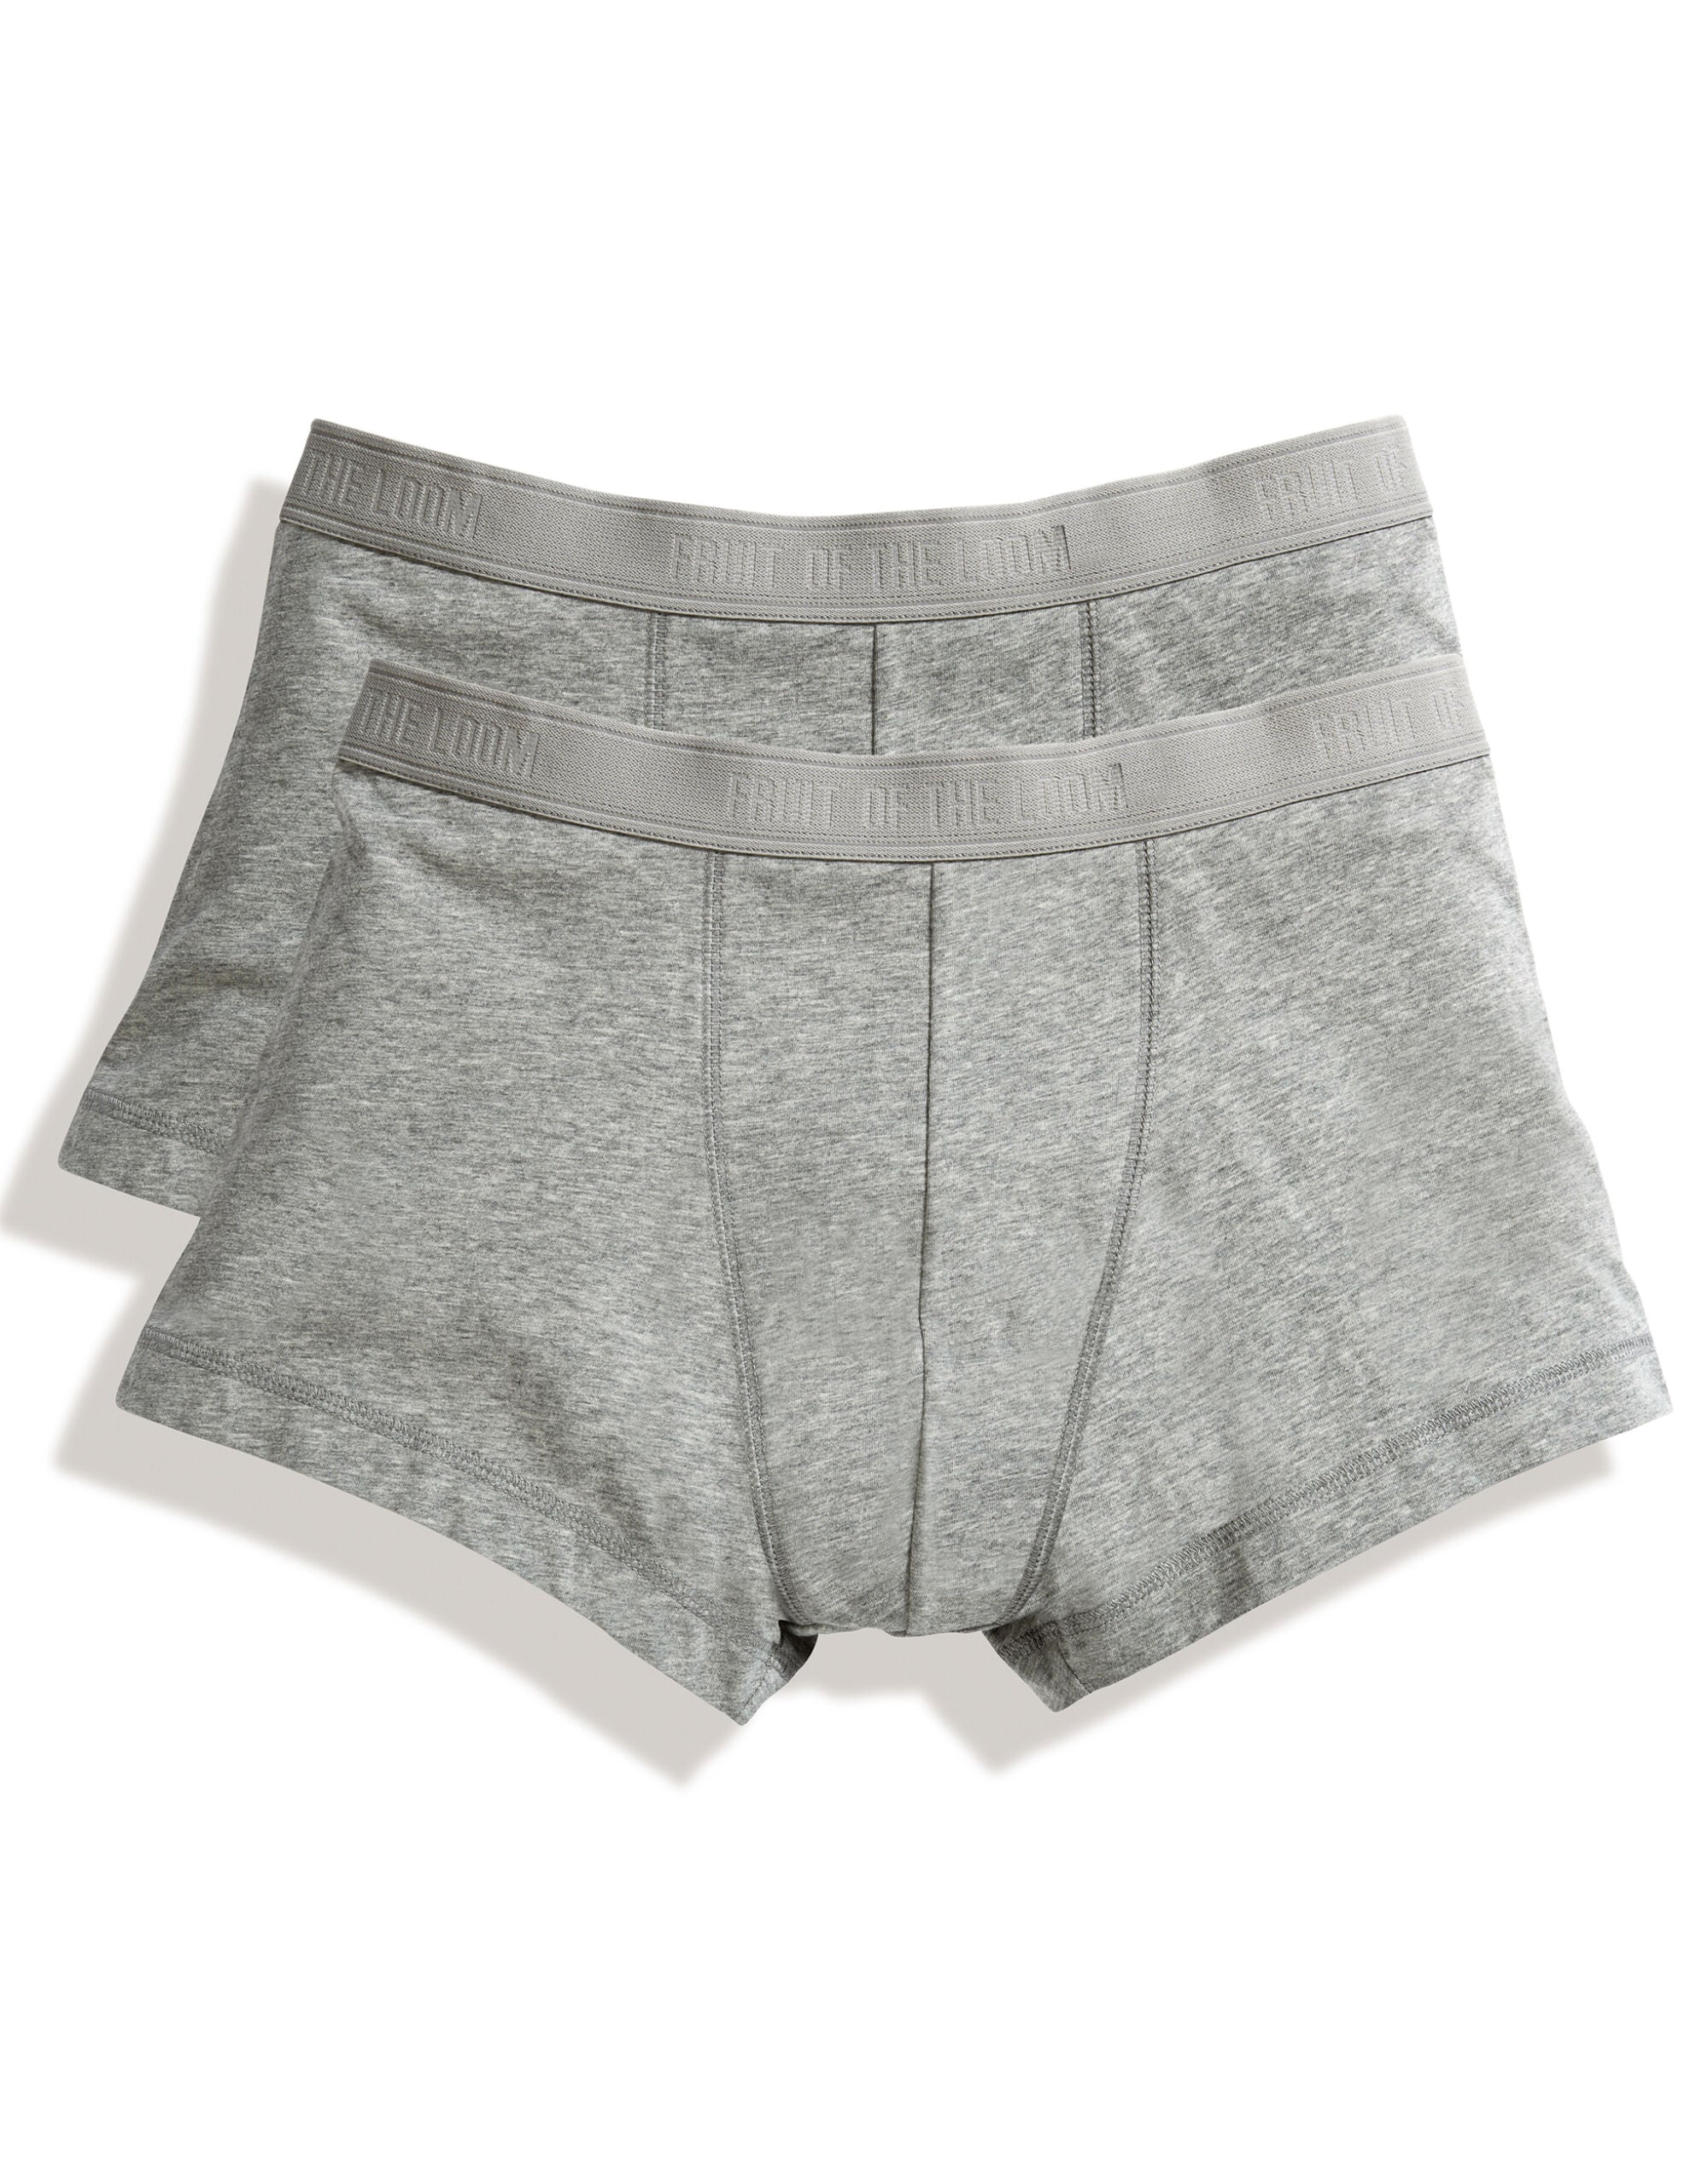 Fruit Of The Loom Underwear Men's Classic Shorty (2 Pack) Modern trunk styling with shorter leg length (67020)